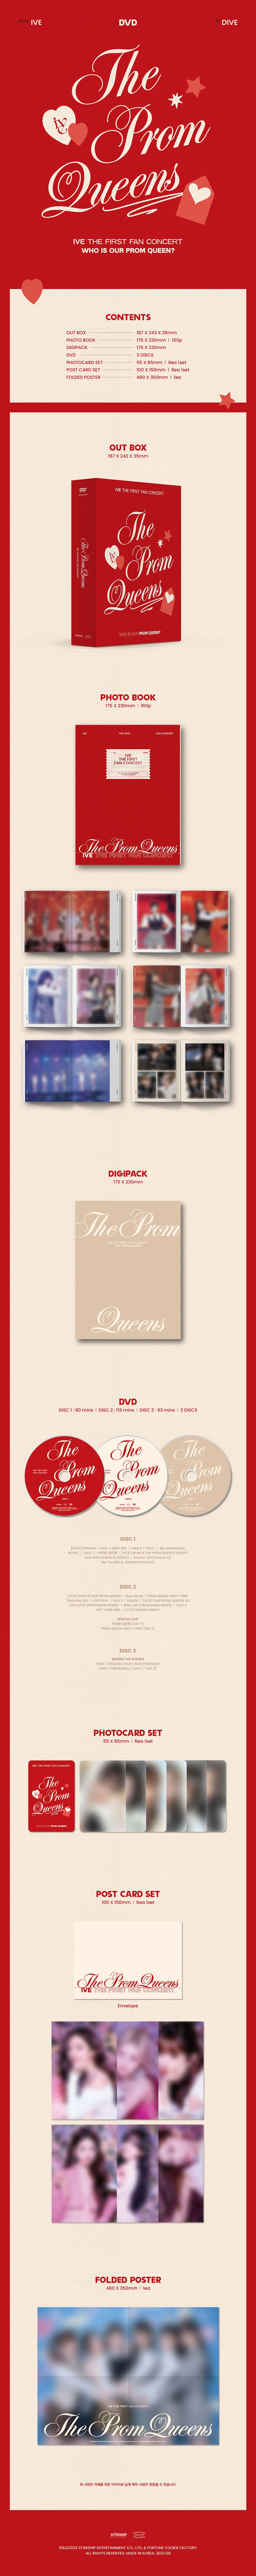 IVE - The Prom Queens [The First Fan Concert - DVD]